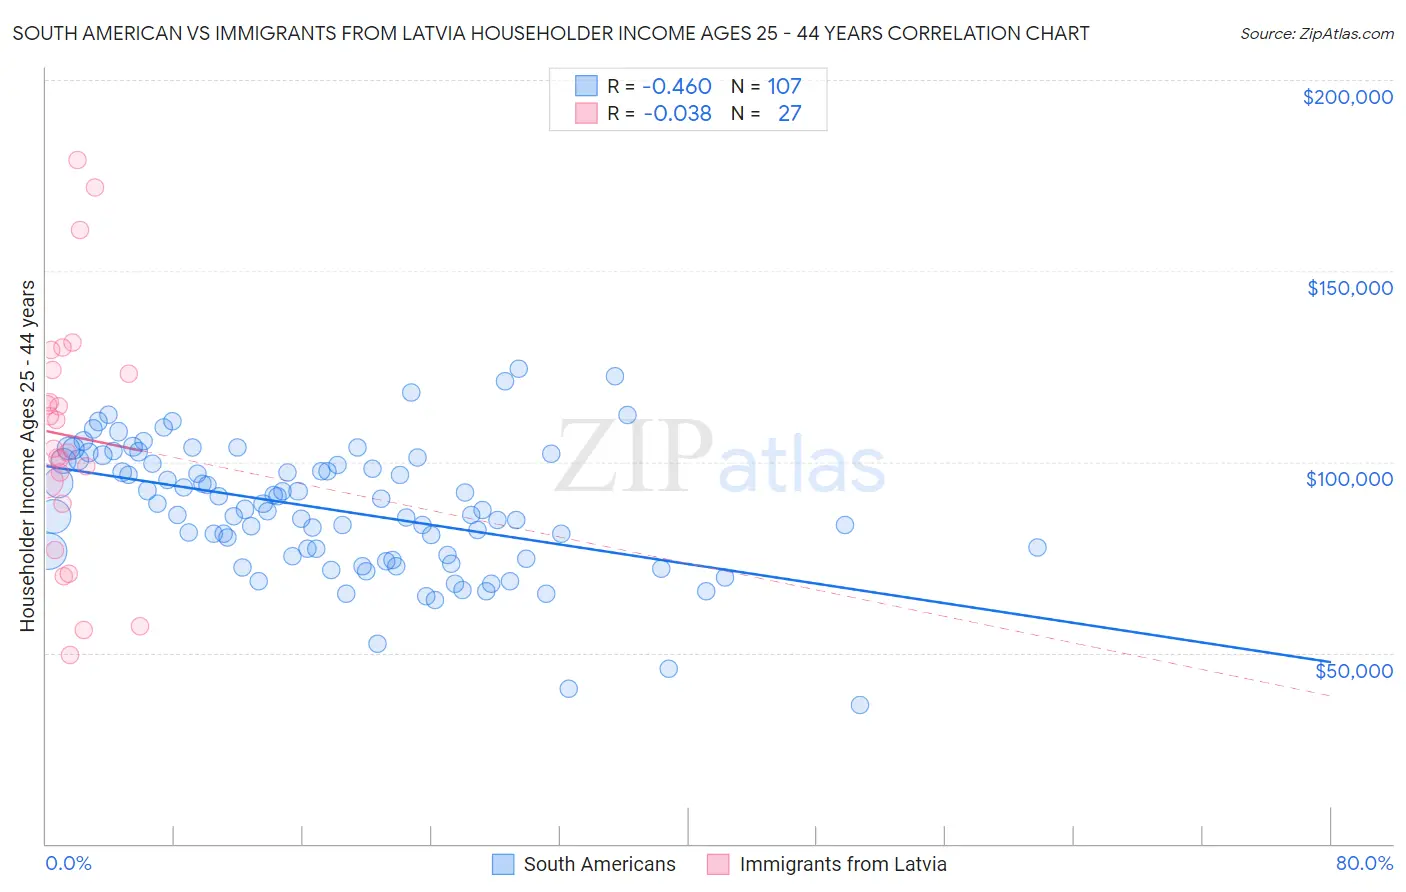 South American vs Immigrants from Latvia Householder Income Ages 25 - 44 years